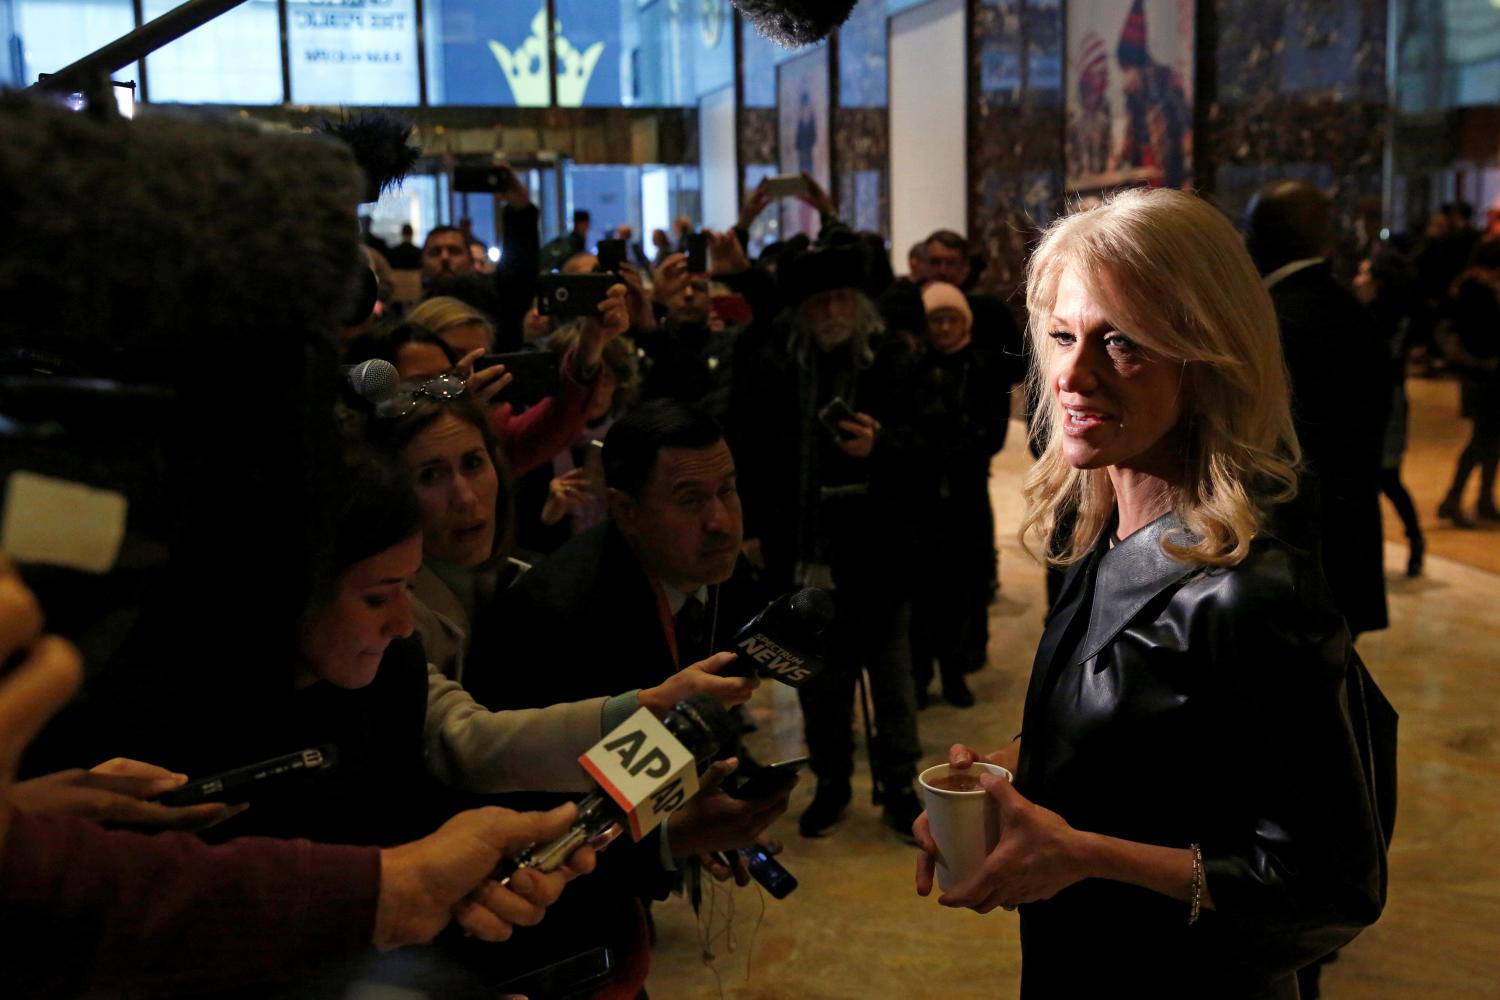 Kellyanne Conway, campaign manager and senior advisor to the Trump Presidential Transition Team, speaks to reporters at Trump Tower in New York